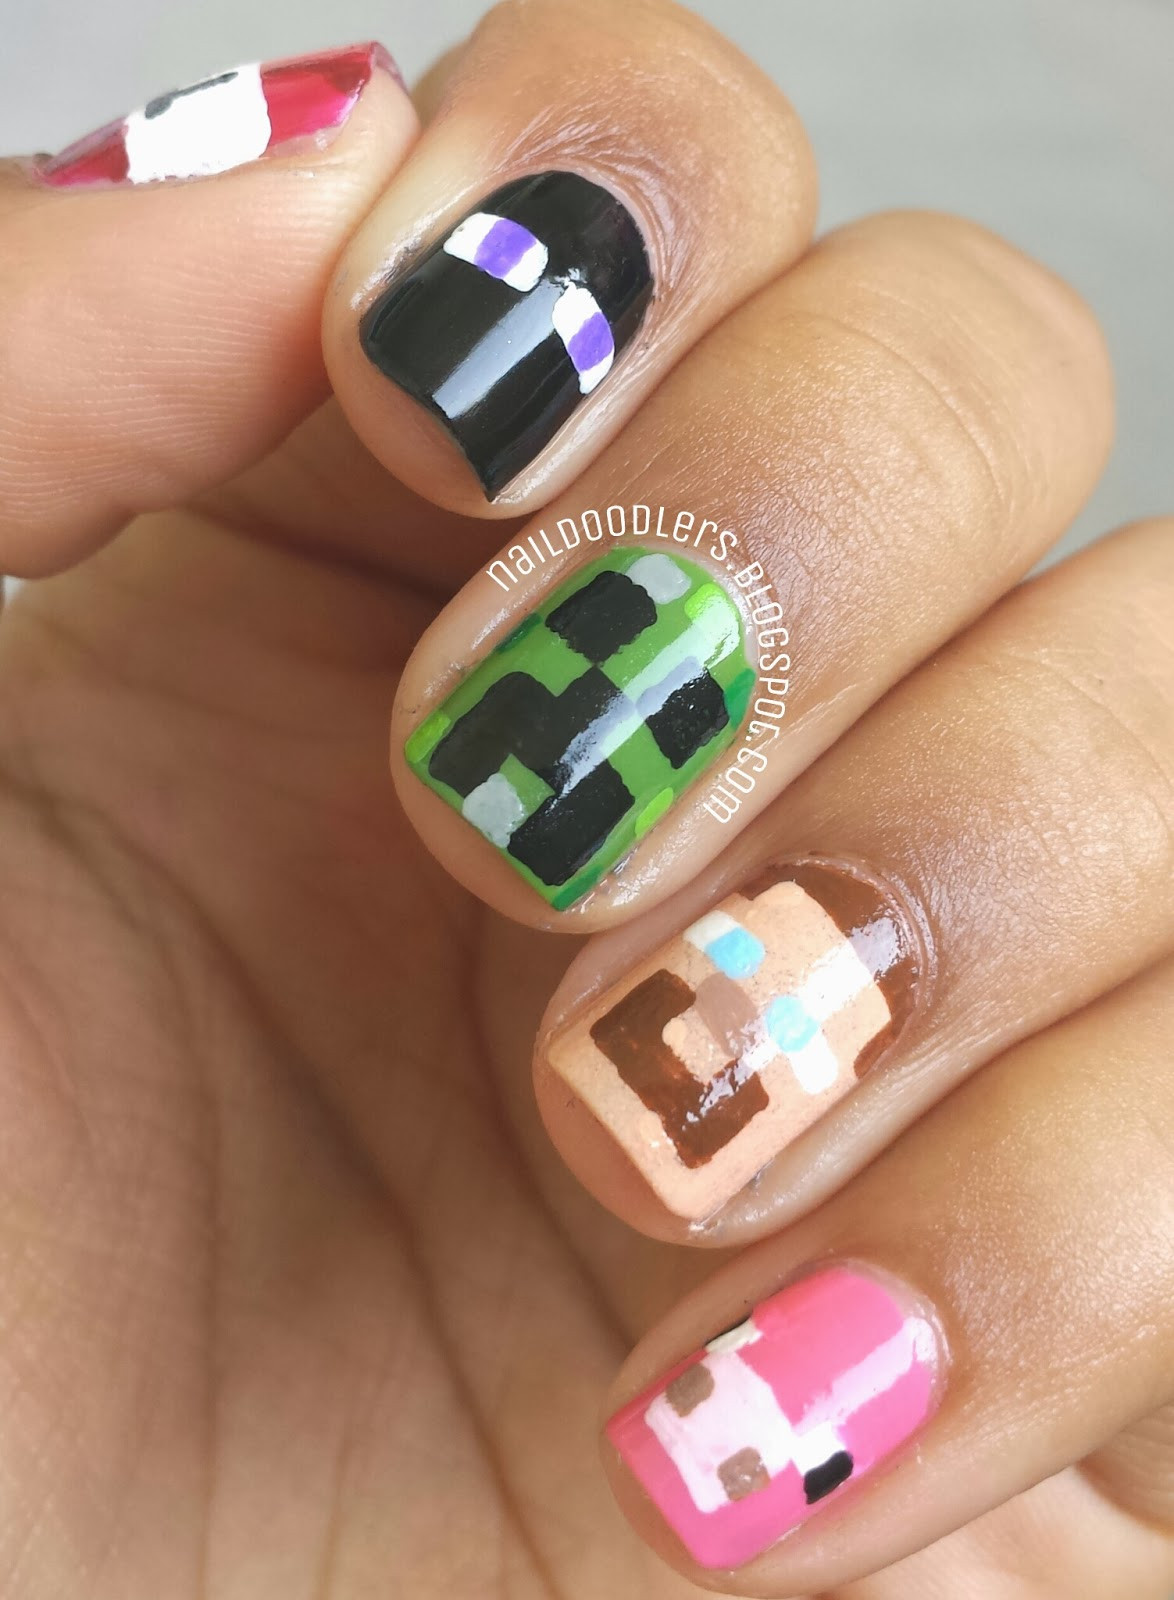 Minecraft Nail Designs
 Nail Doodlers Minecraft nails